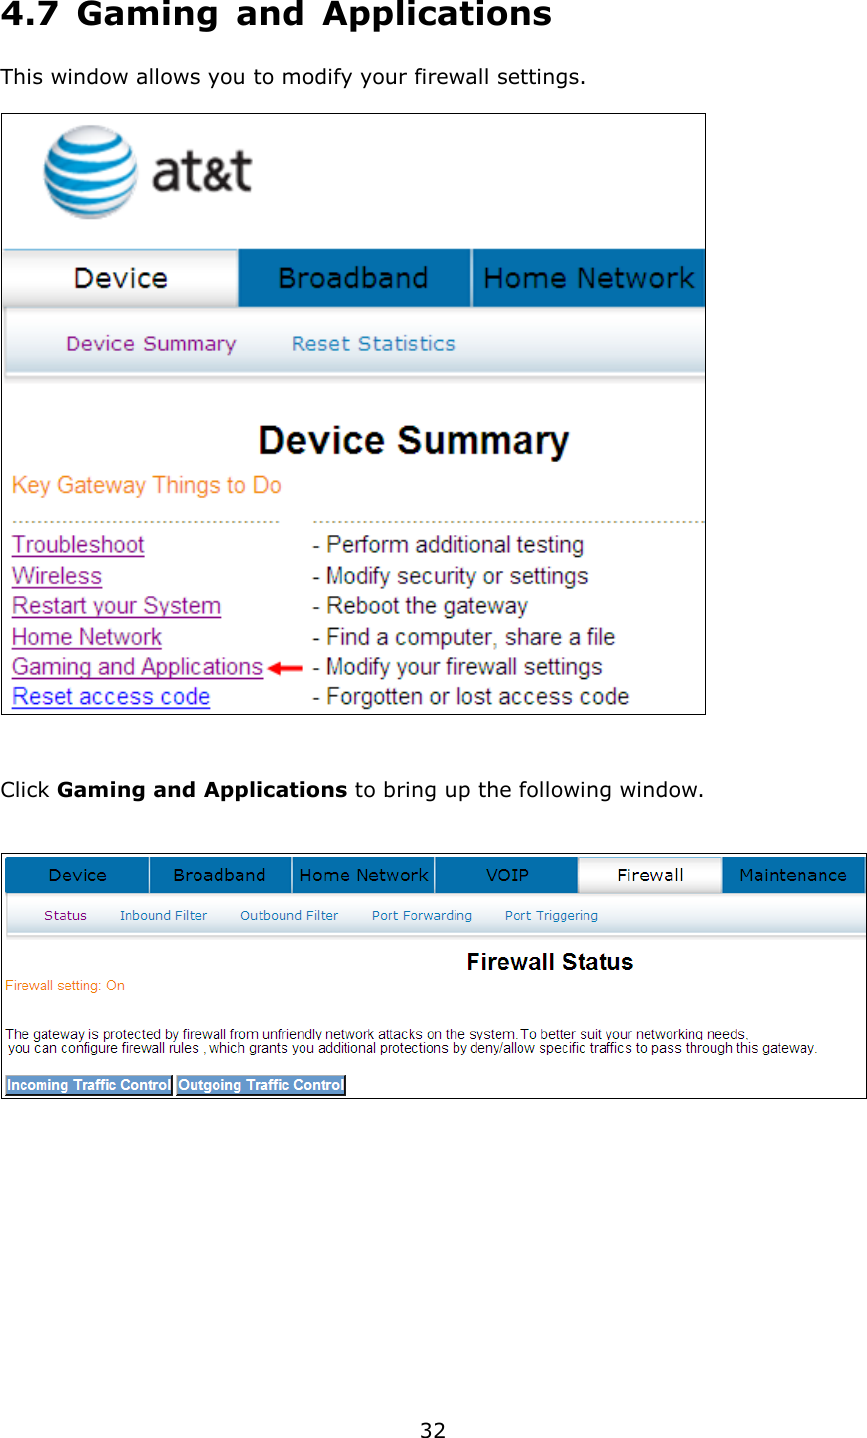 32 4.7  Gaming  and  Applications This window allows you to modify your firewall settings.   Click Gaming and Applications to bring up the following window.          